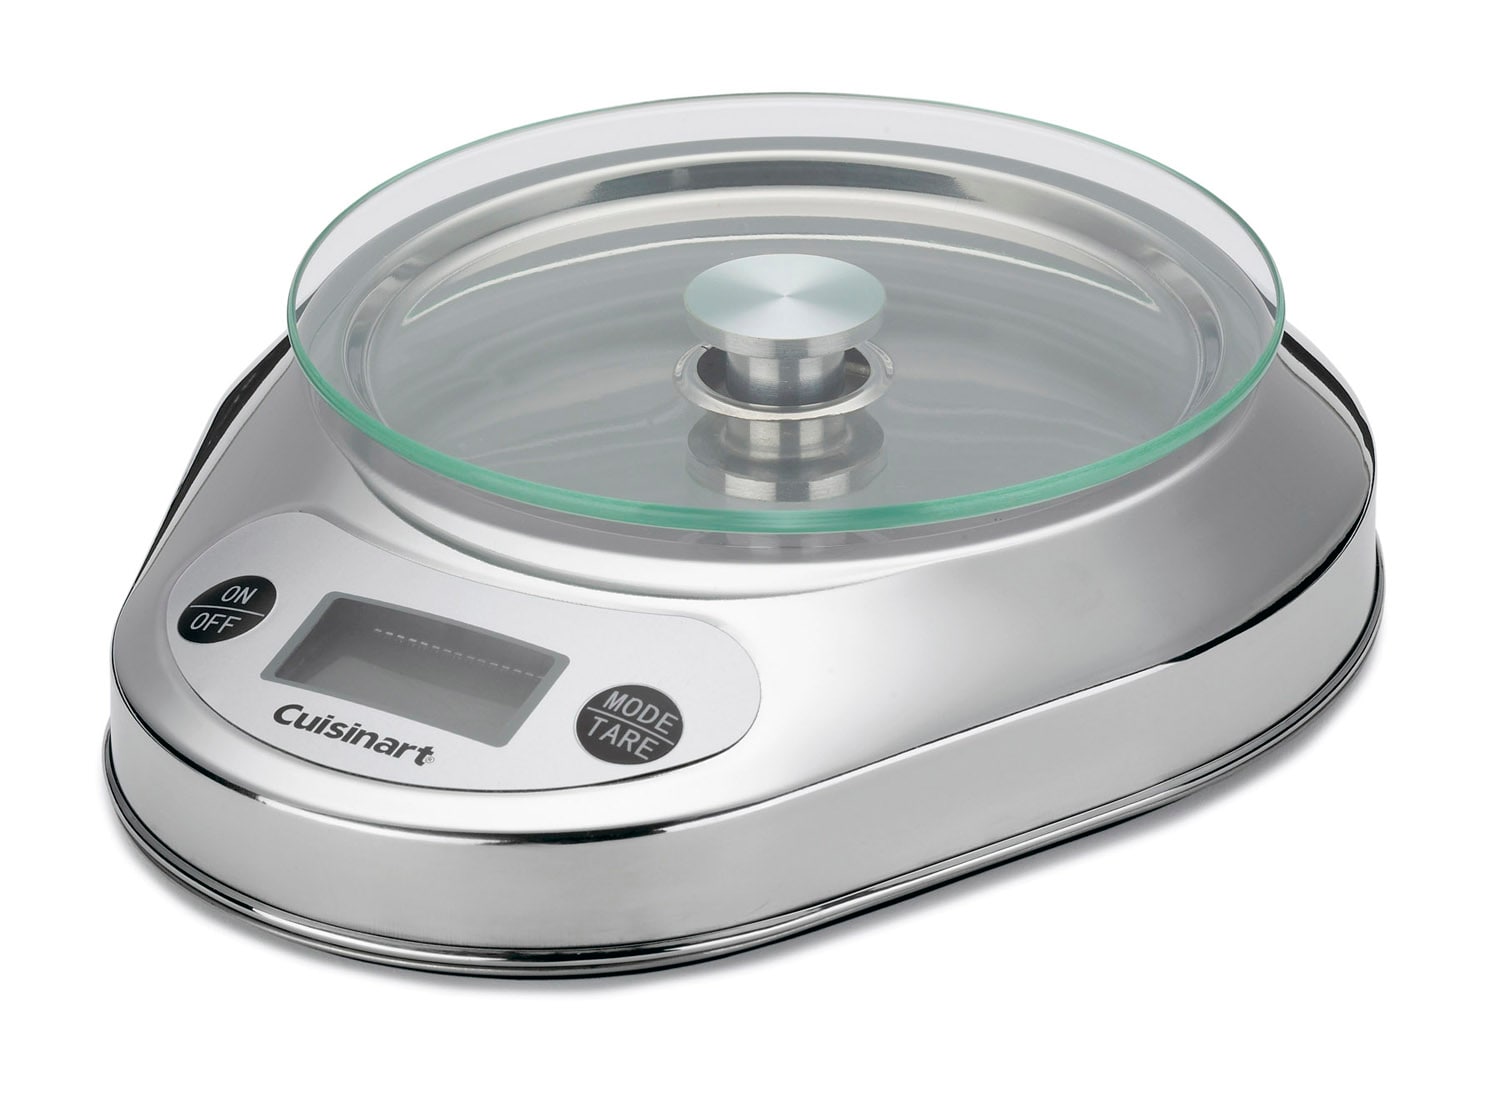 Cuisinart Stainless Steel Kitchen Scale with Removable Cover, 11